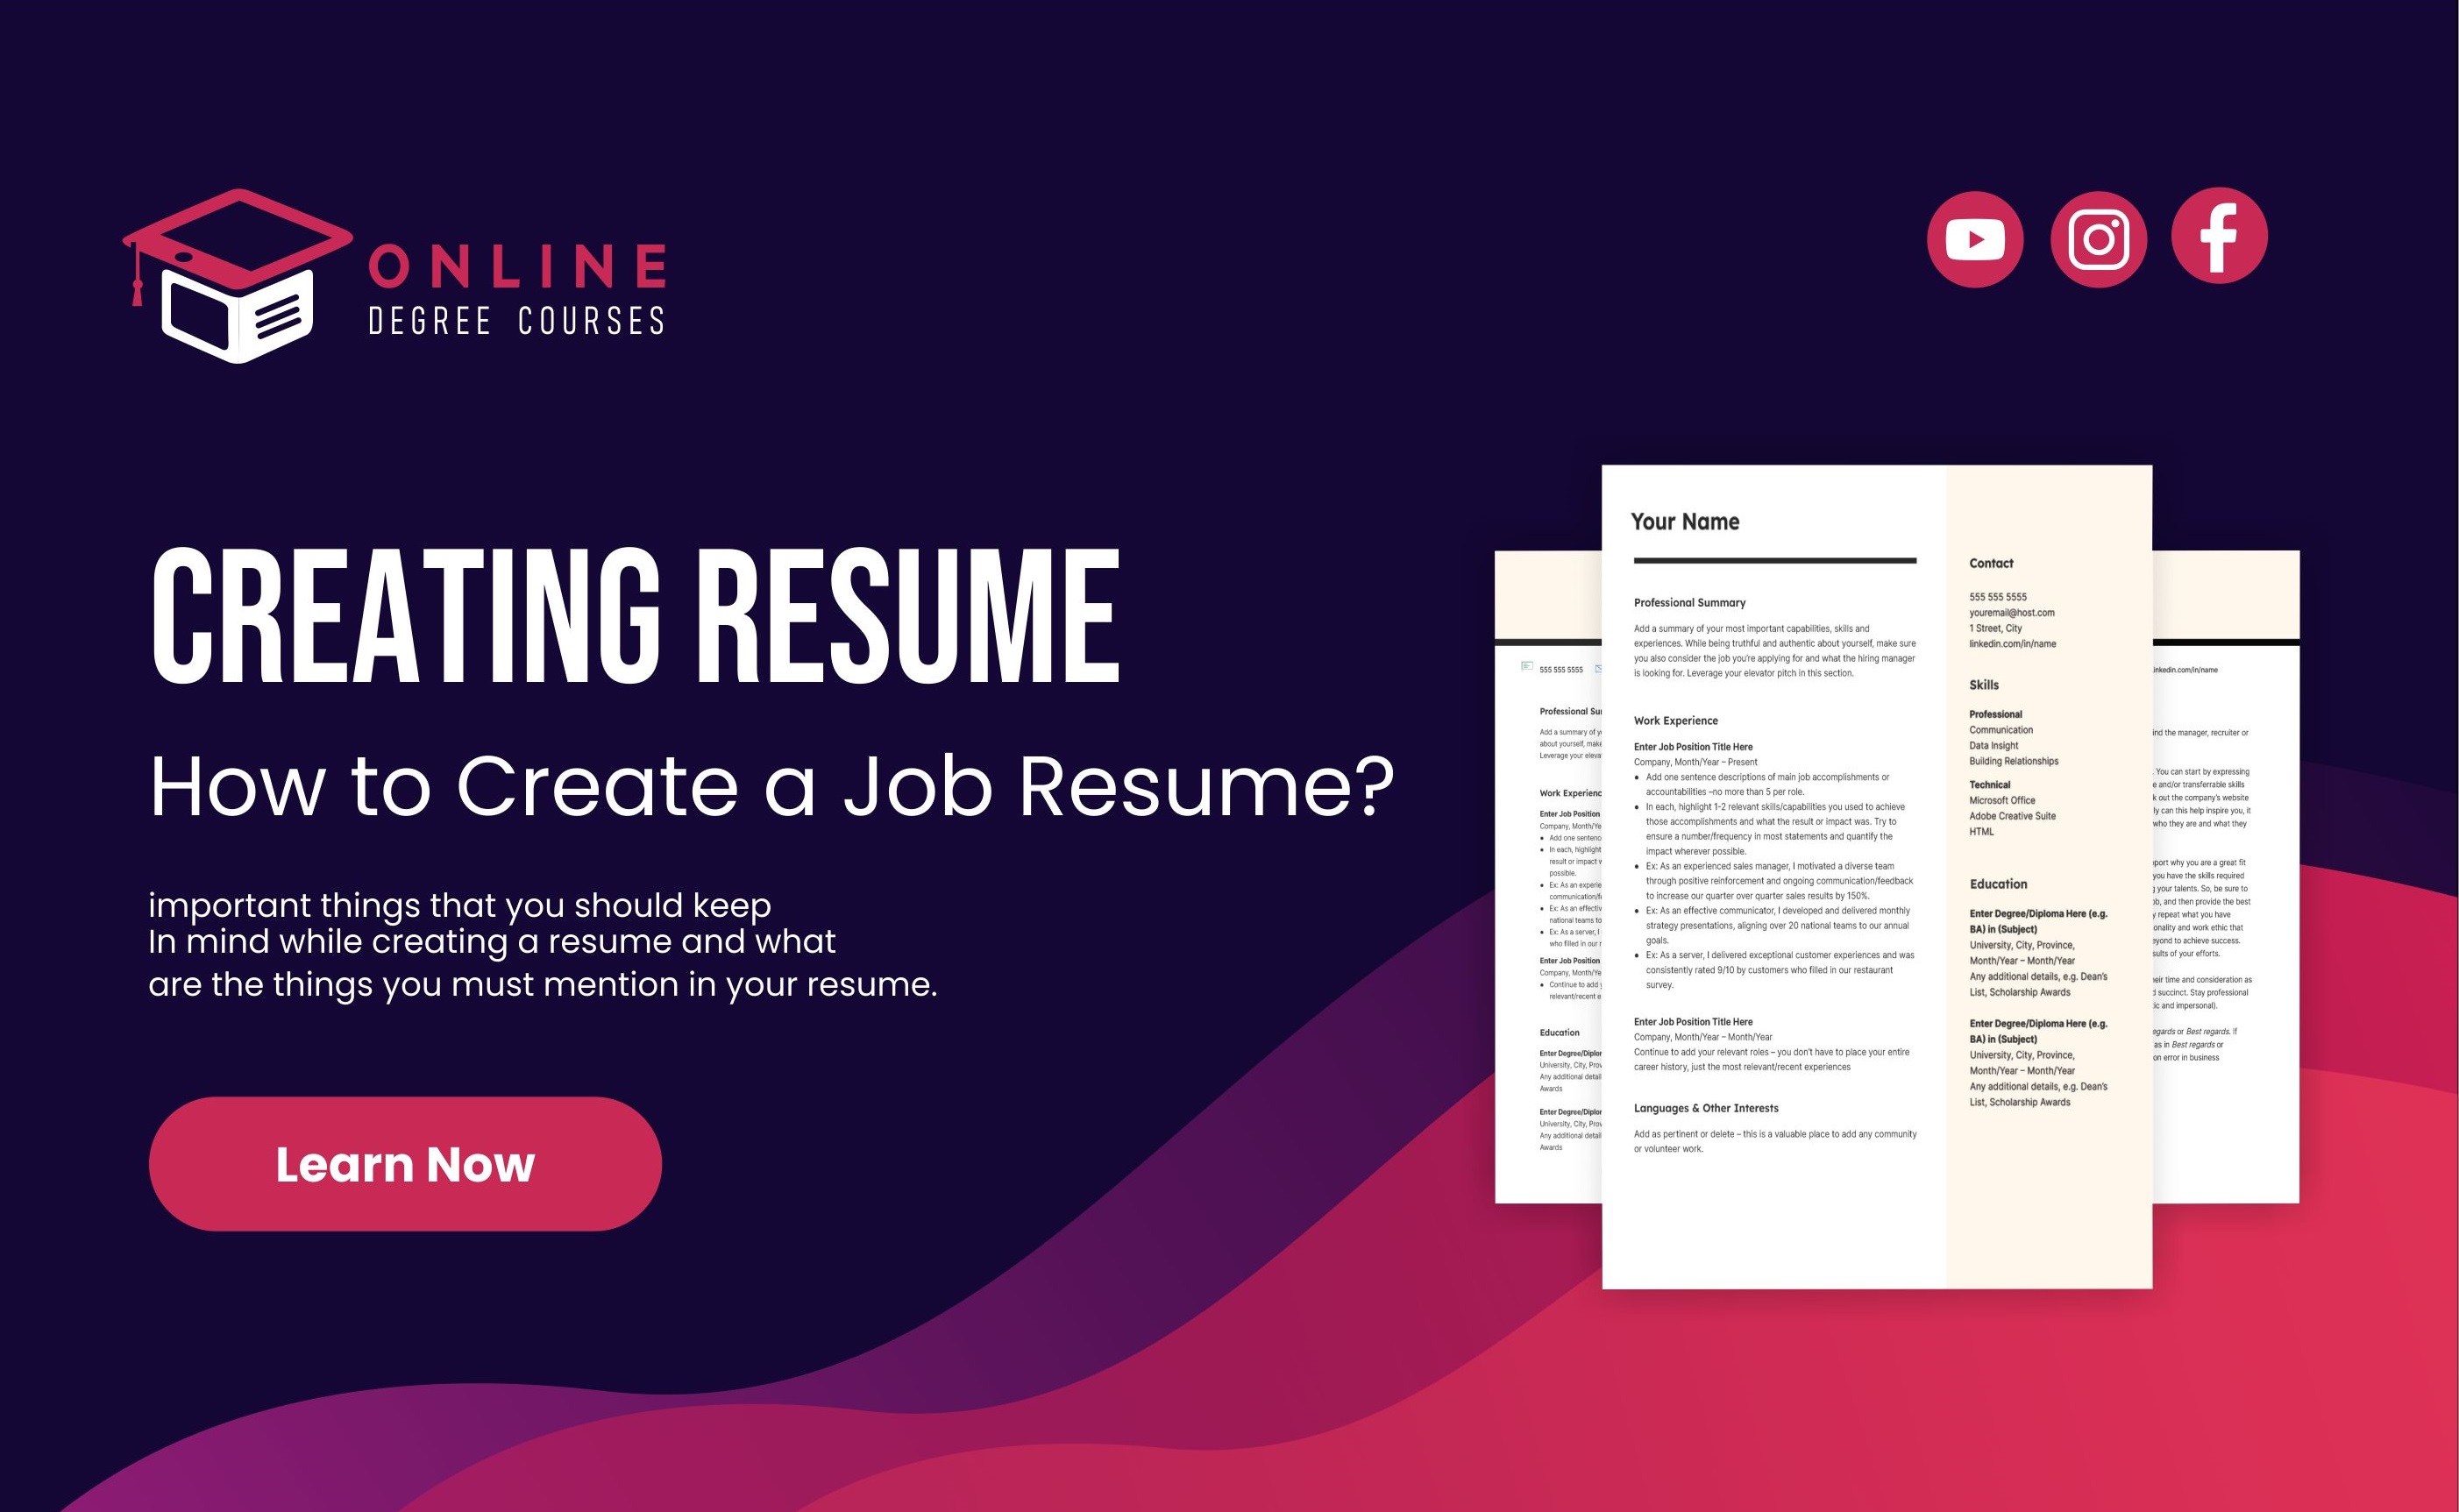 Guide for Creating a Resume Article - Cover Image